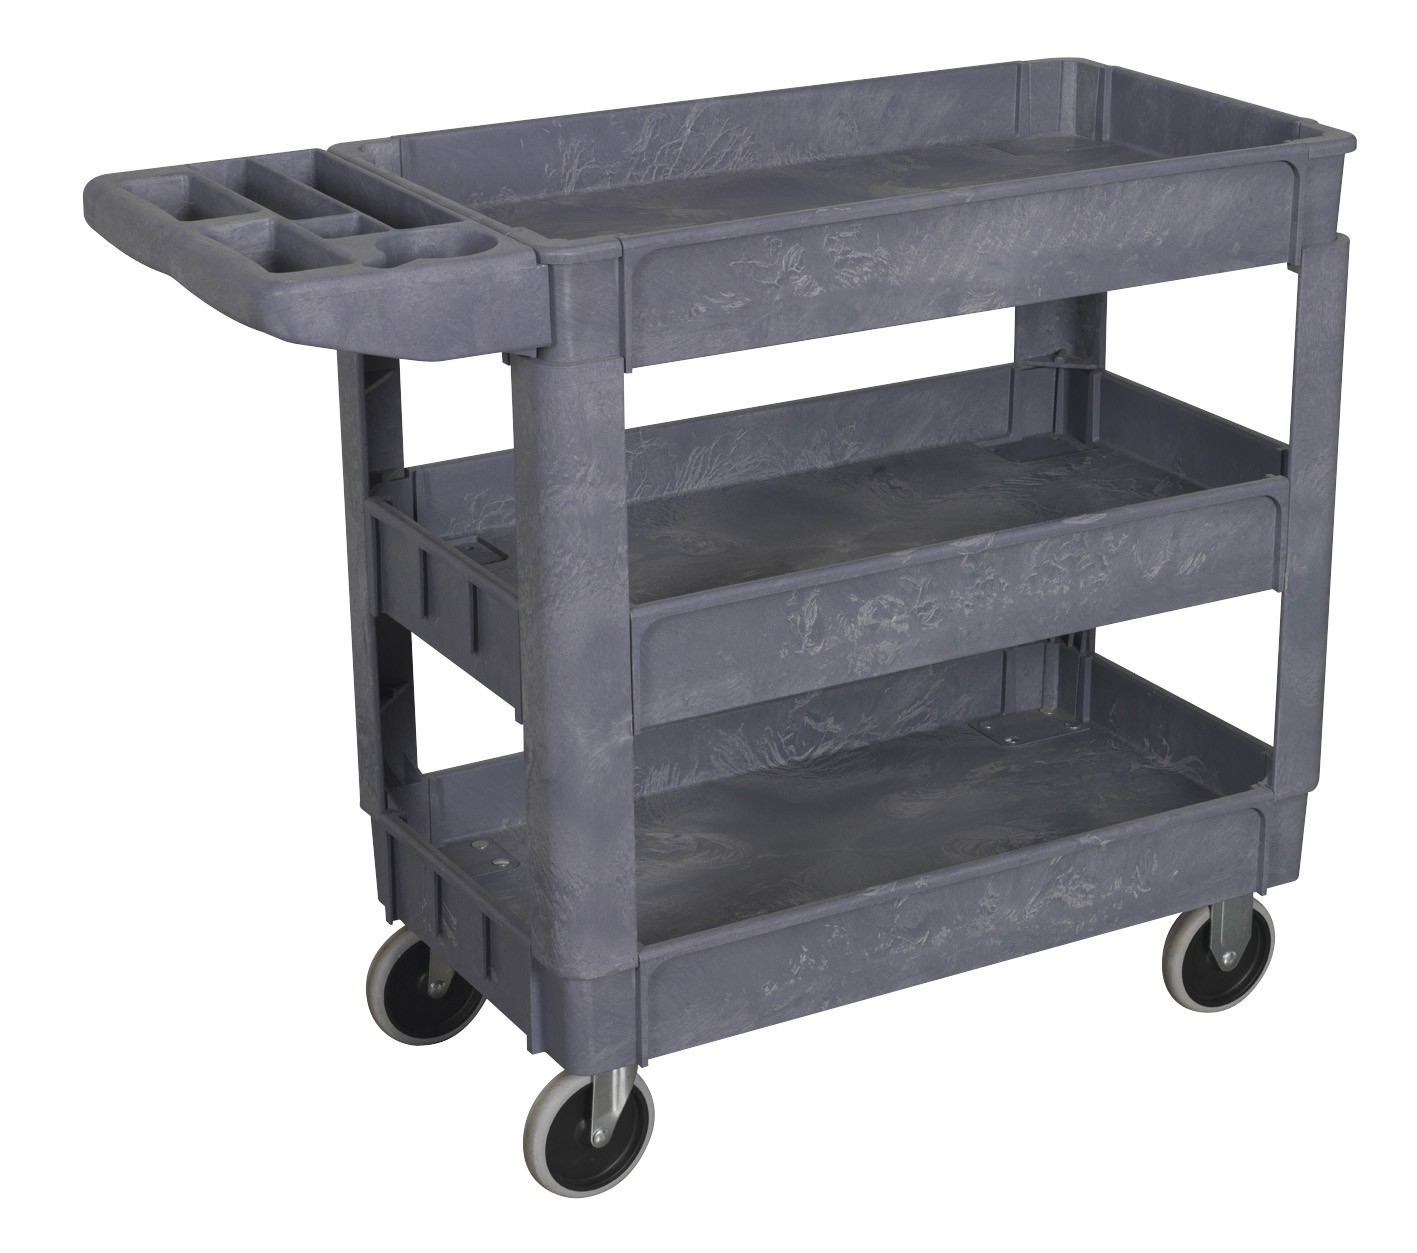 TROLLEY 3-LEVEL COMPOSITE HEAVY-DUTY FROM SEALEY CX203 SYD